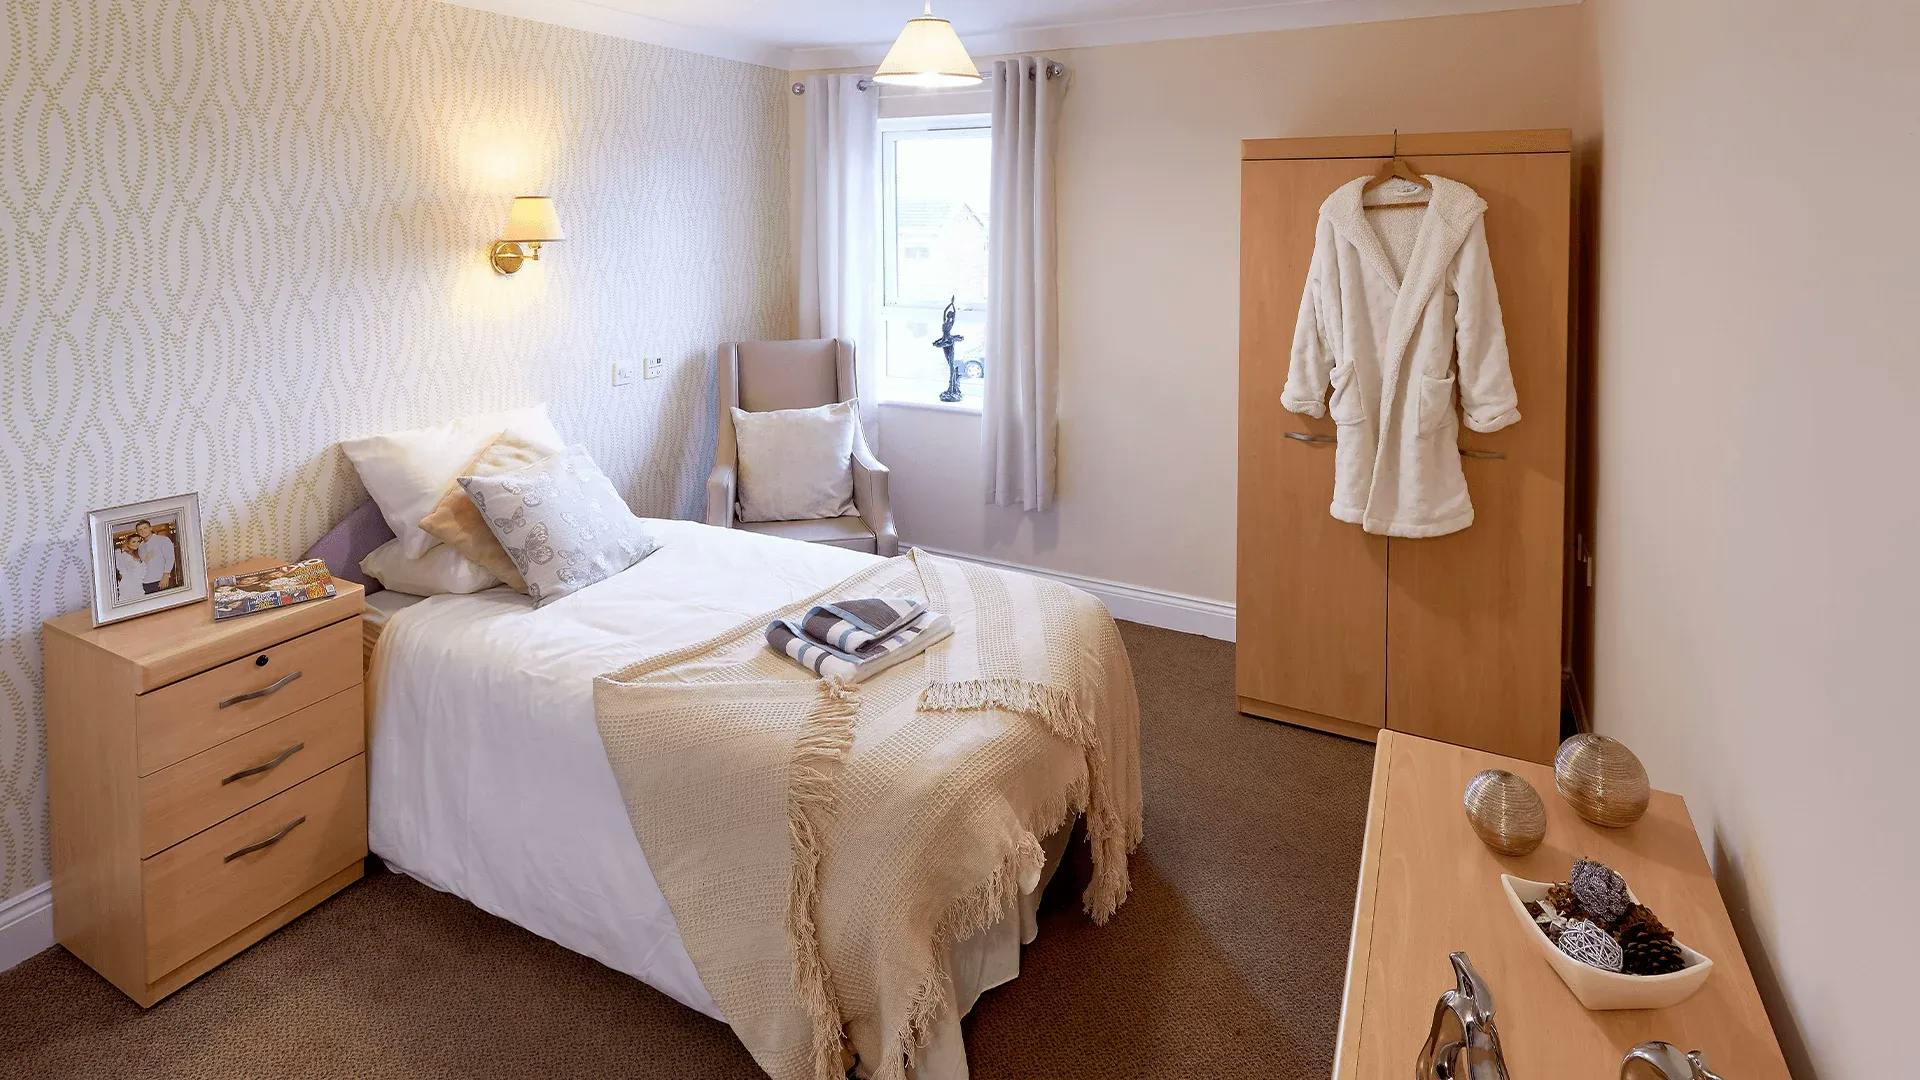 Bedroom at Highcliffe Care Home in Sunderland, Tyne and Wear